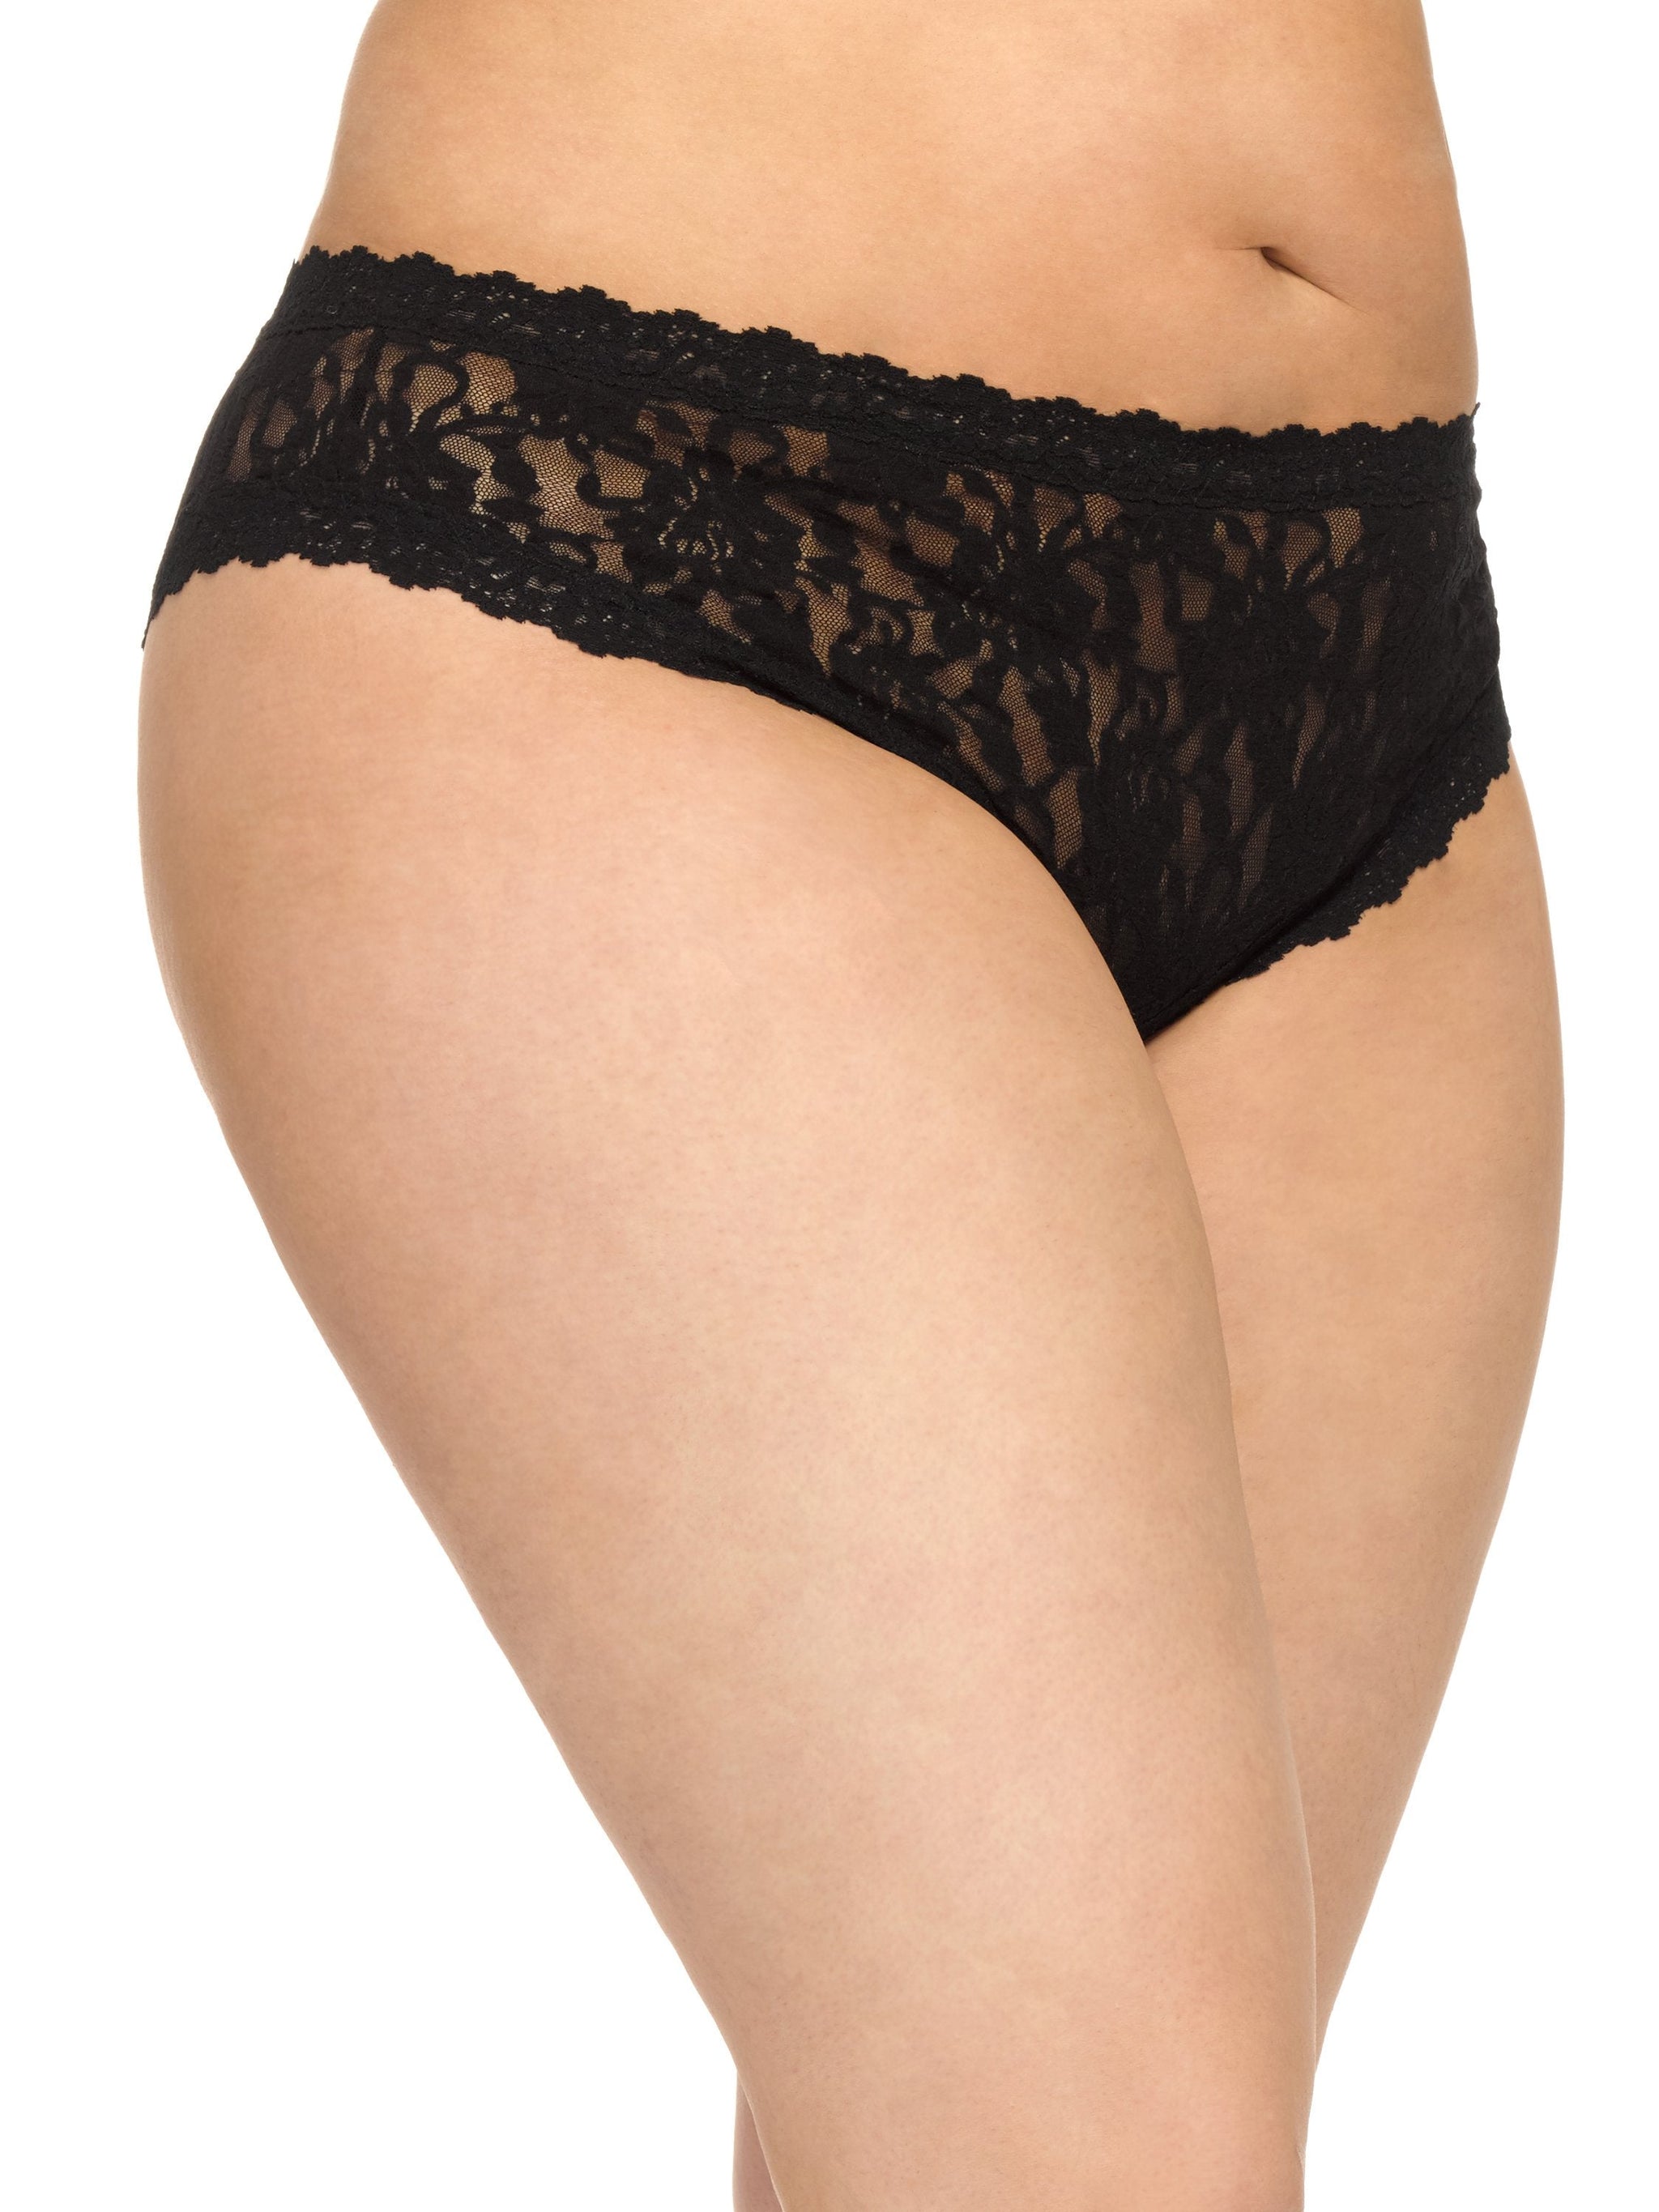 Printed Signature Lace Crotchless Cheeky Hipster Am I Dreaming